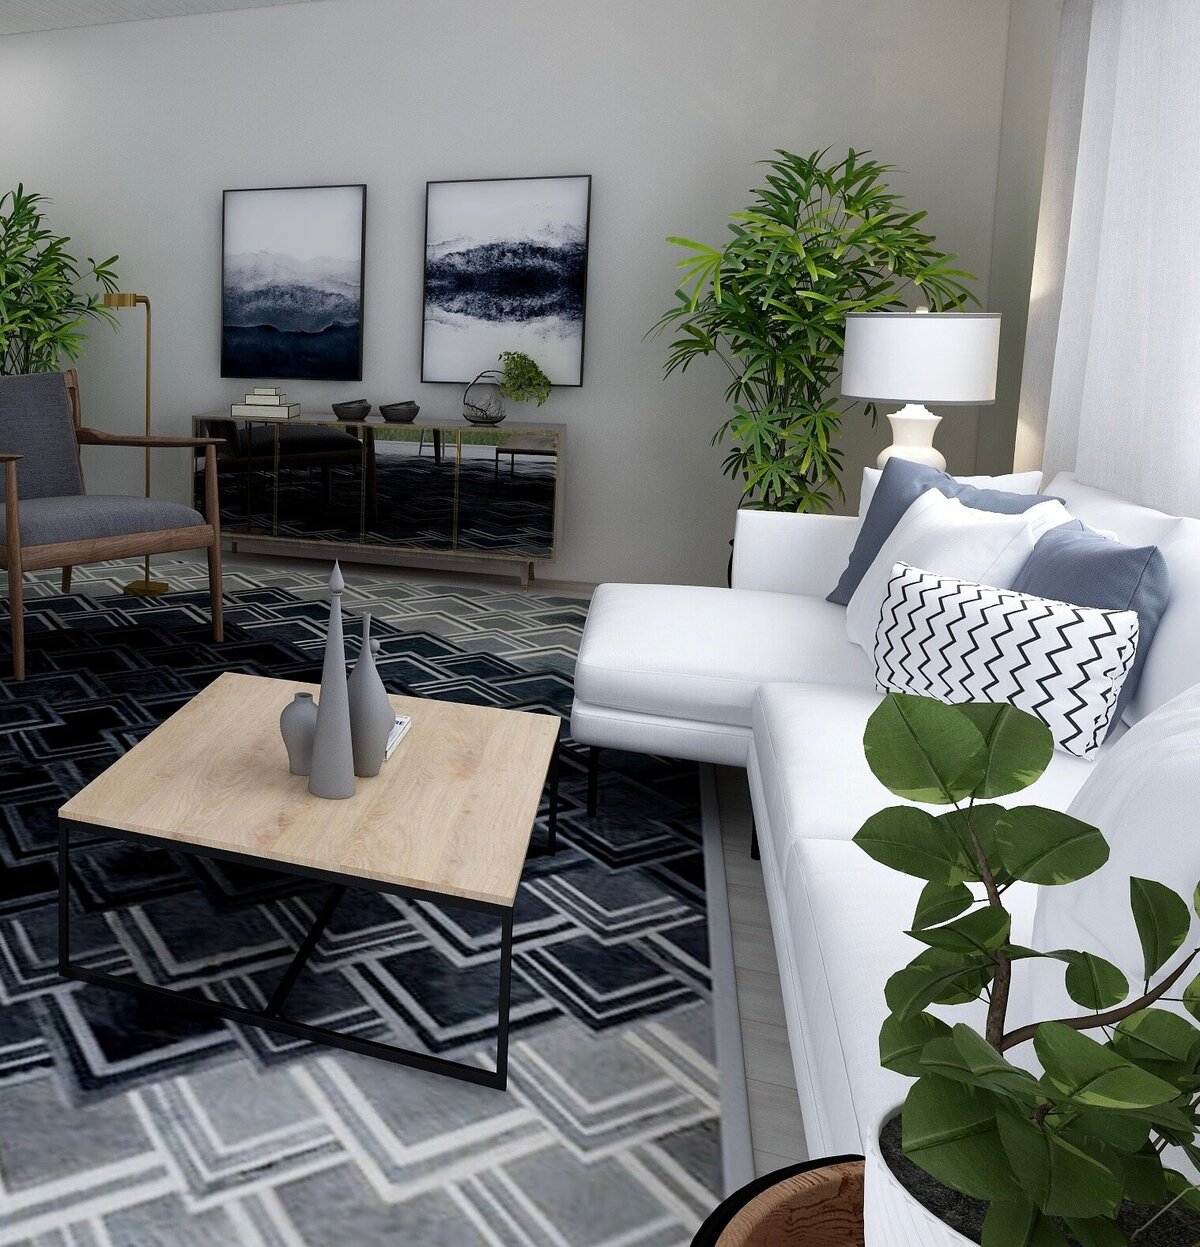 White and black moody living room rendering